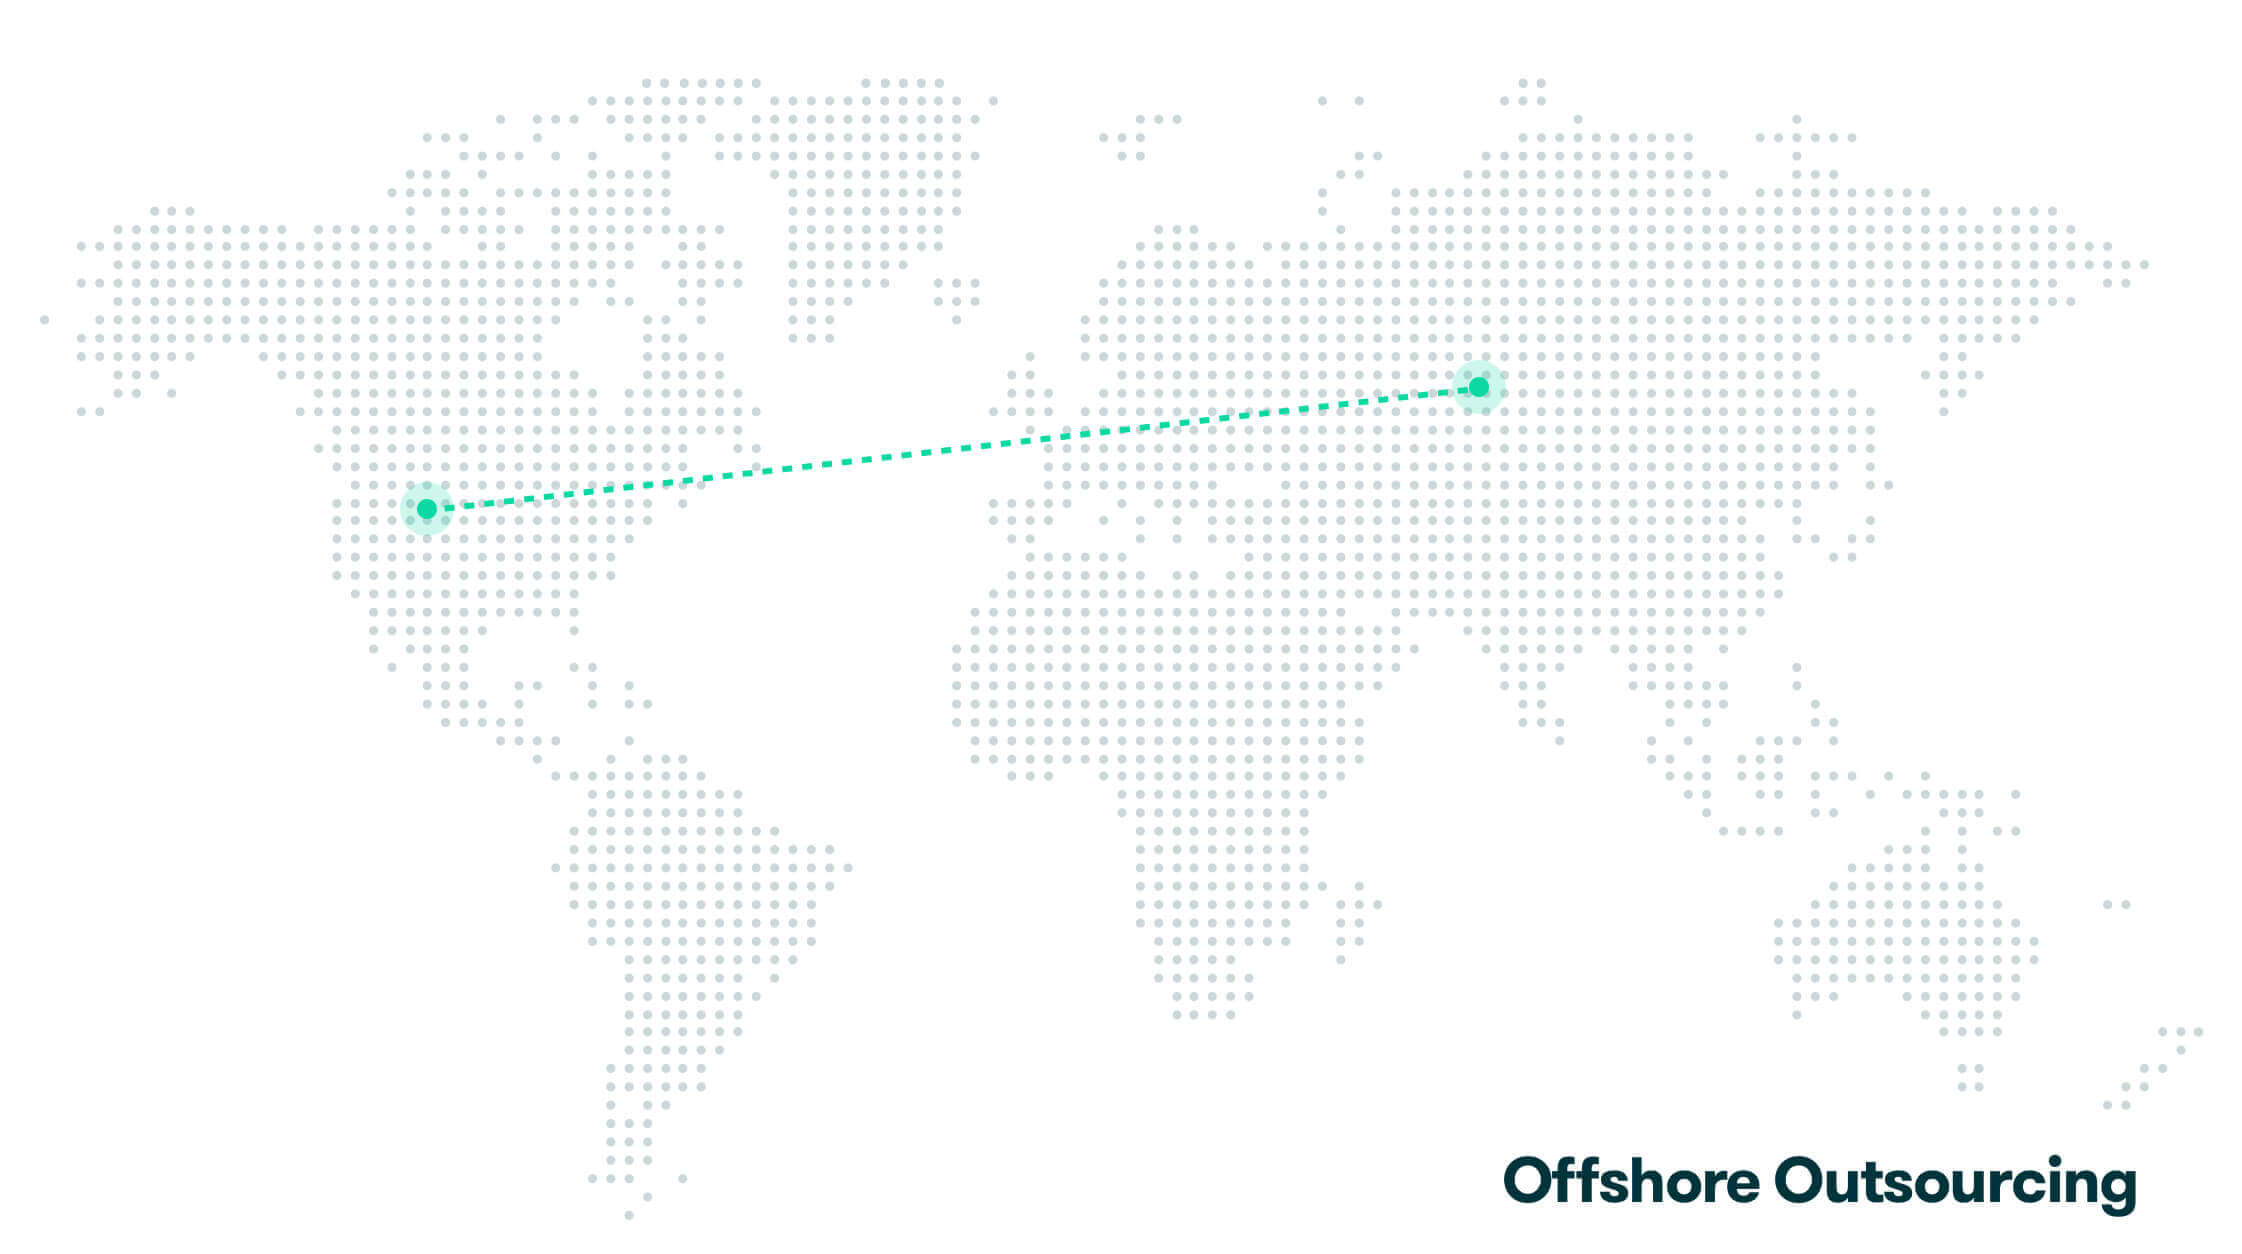 Offshore outsourcing